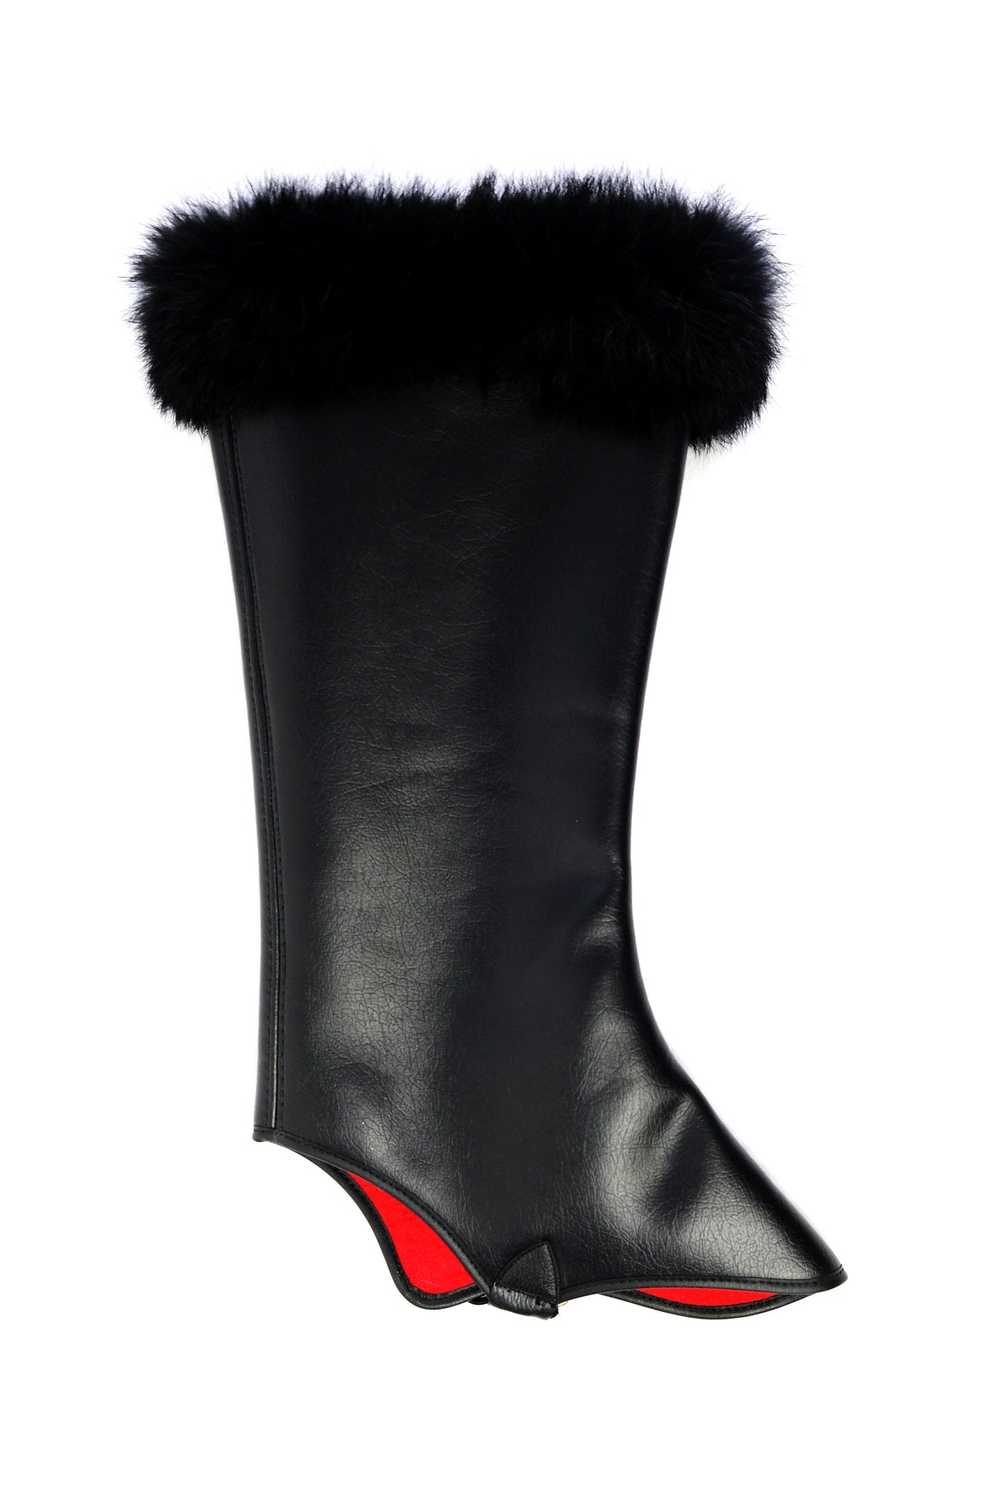 1960s Vintage Faux Leather and Fur Gaiters - image 5